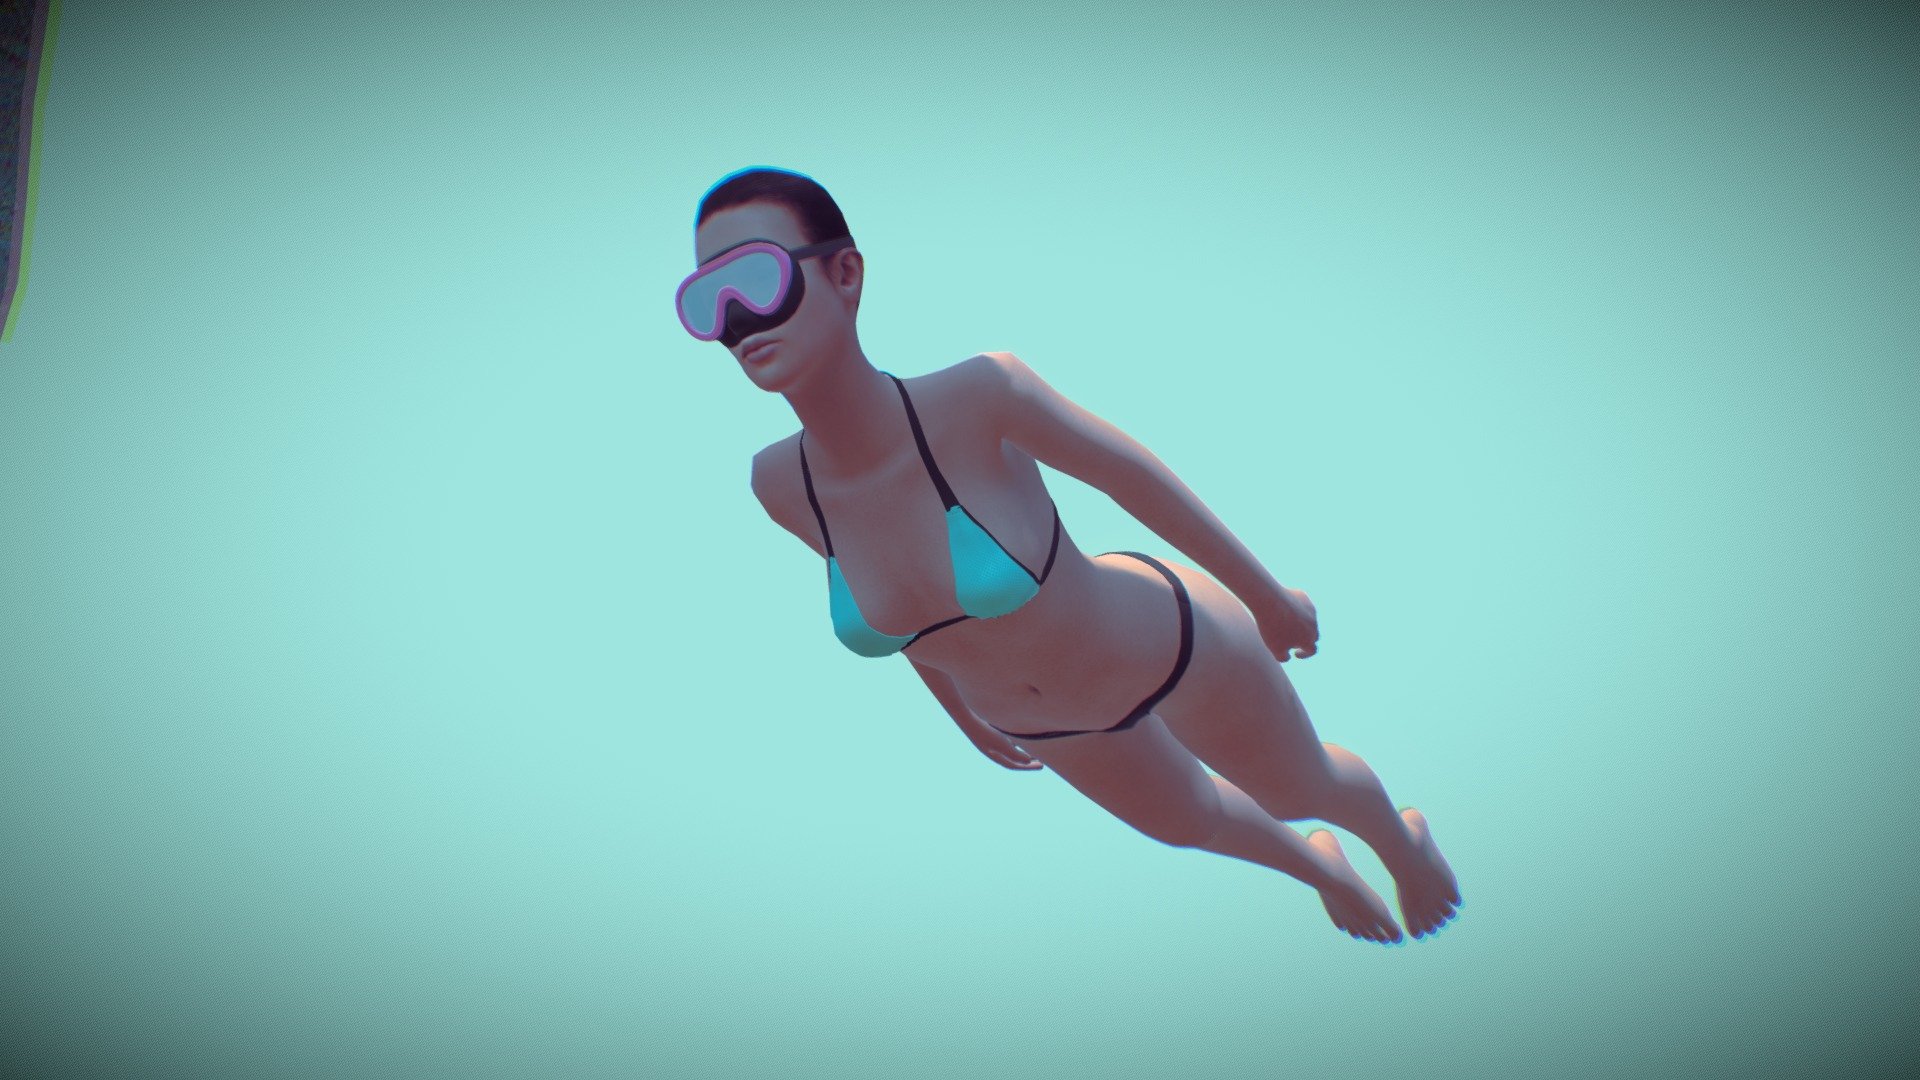 This is my attempt to create a beautiful girl underwater swimming animation. Maybe it's better to turn on some ambient music while watching this scene :)

Hope you enjoy it! - Girl Scuba Diving Animation - 3D model by andrdudka 3d model